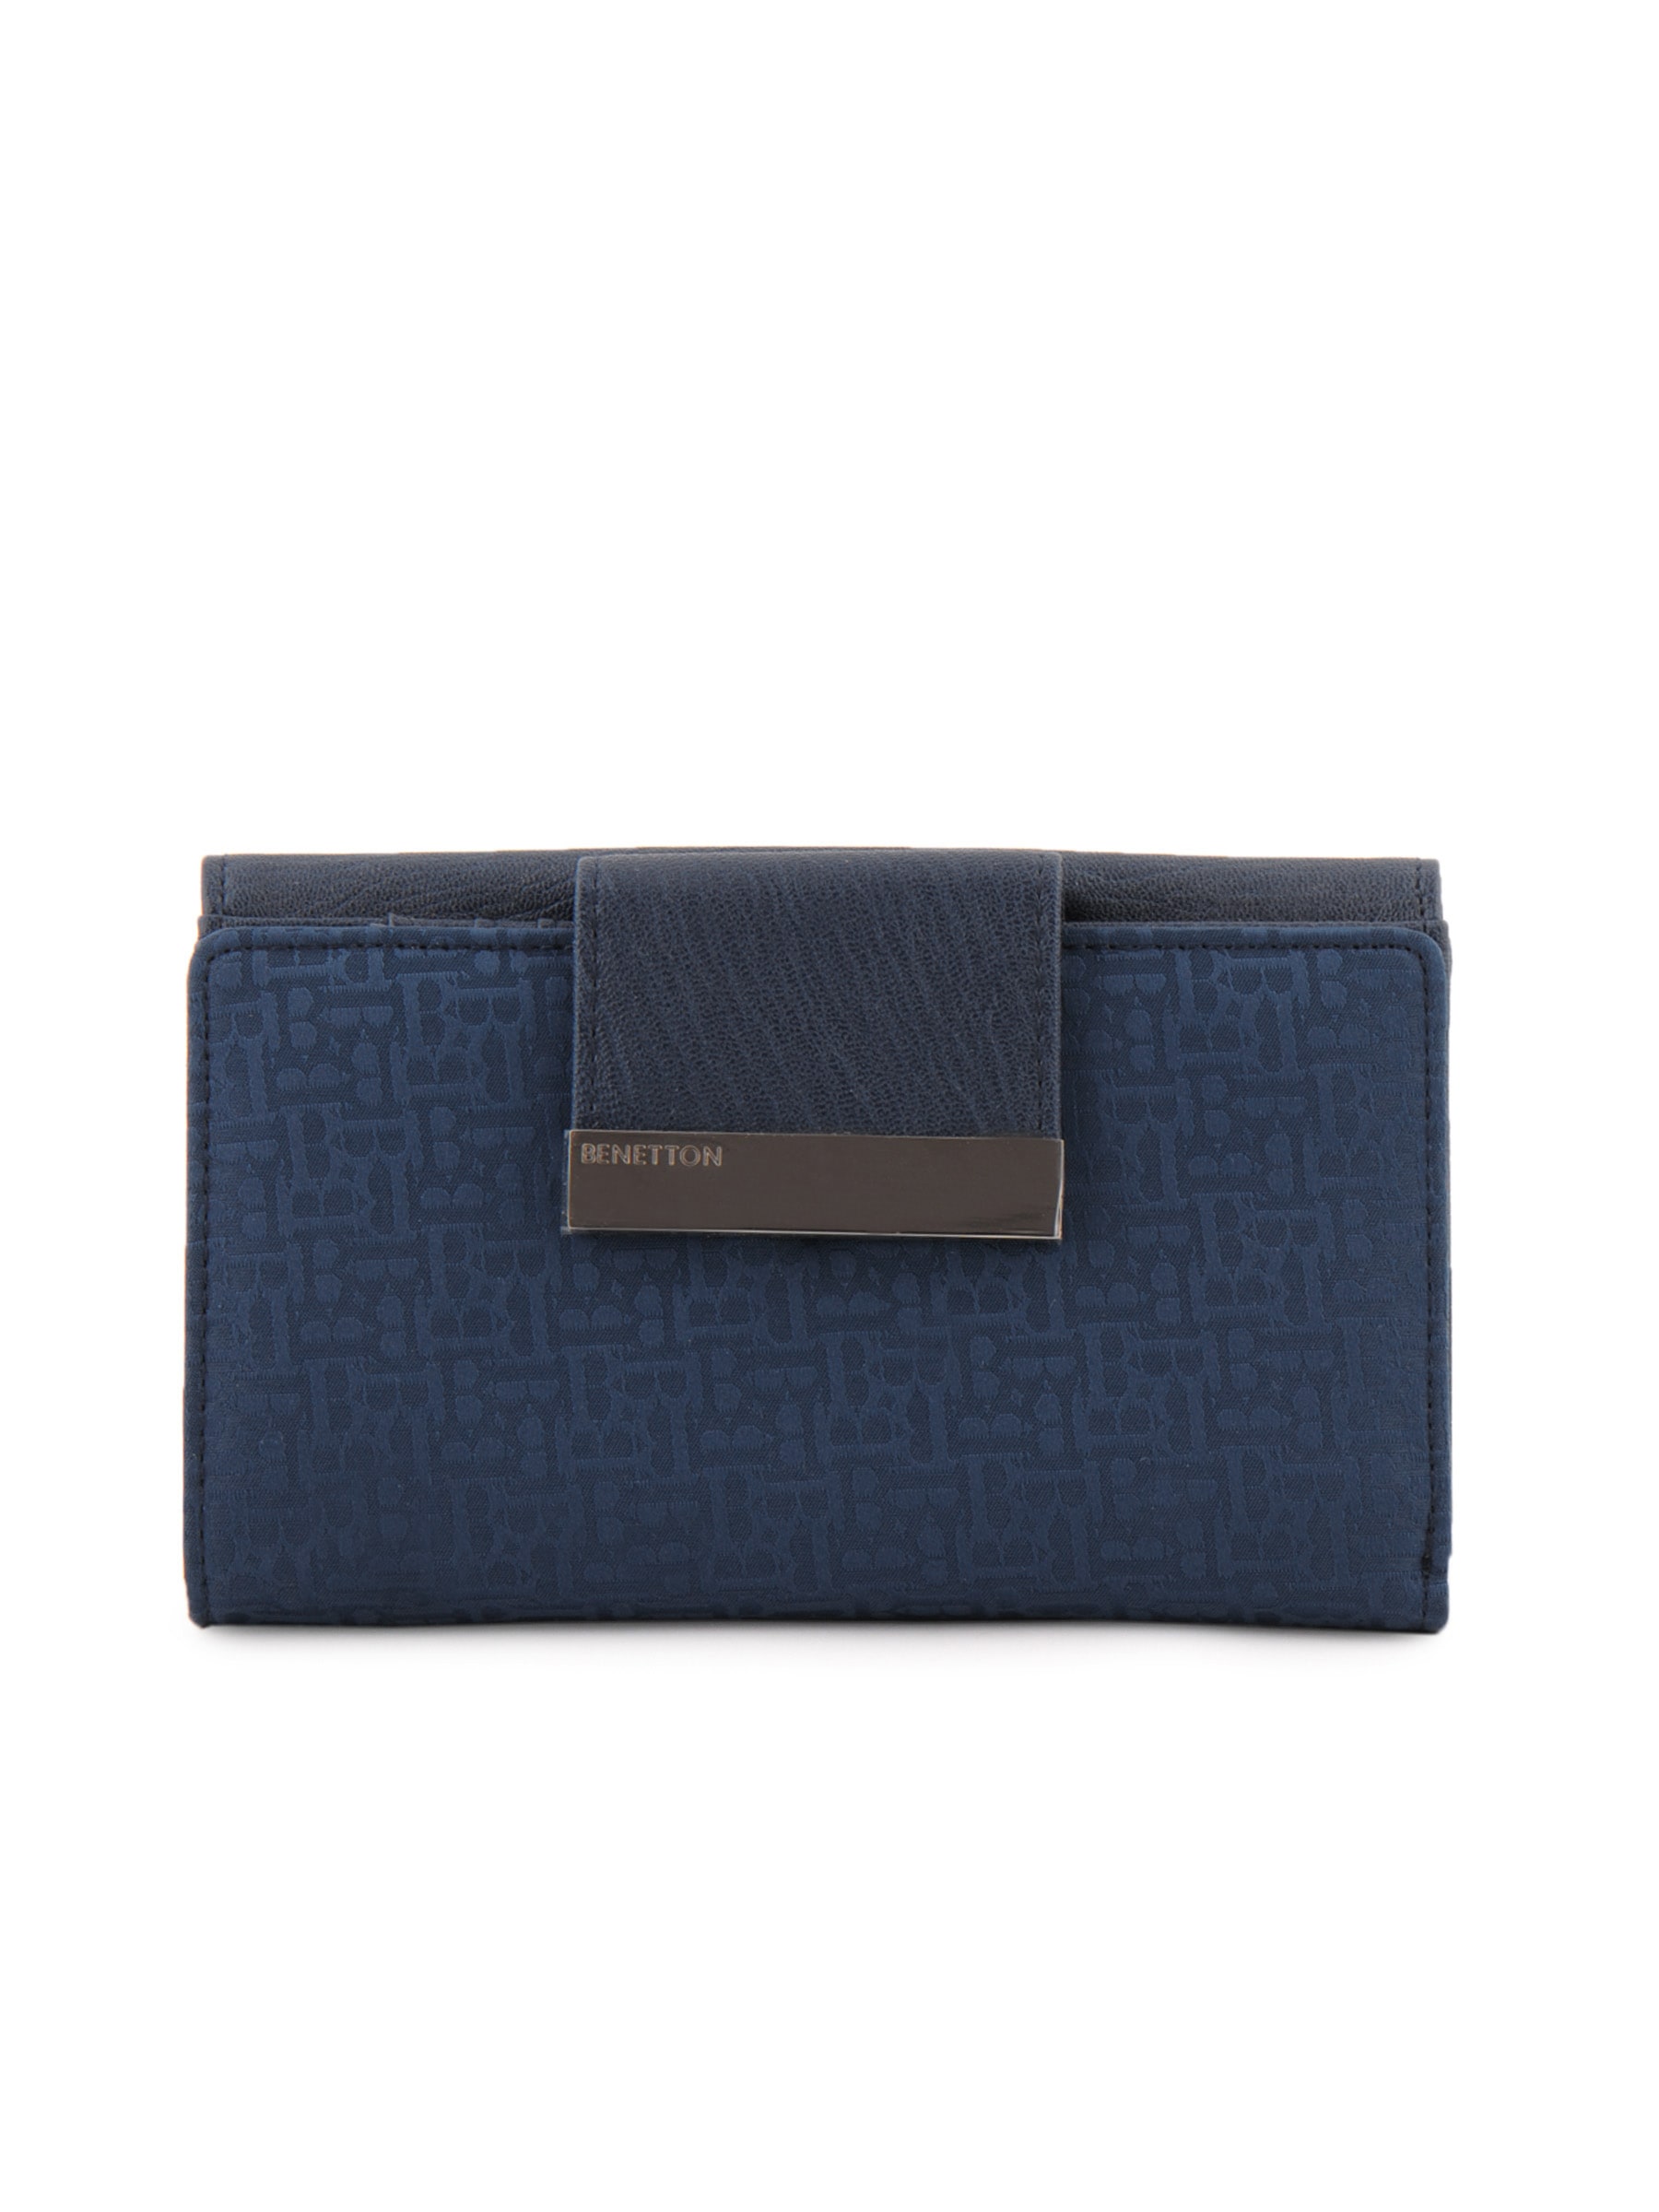 United Colors of Benetton Women Solid Blue Wallets